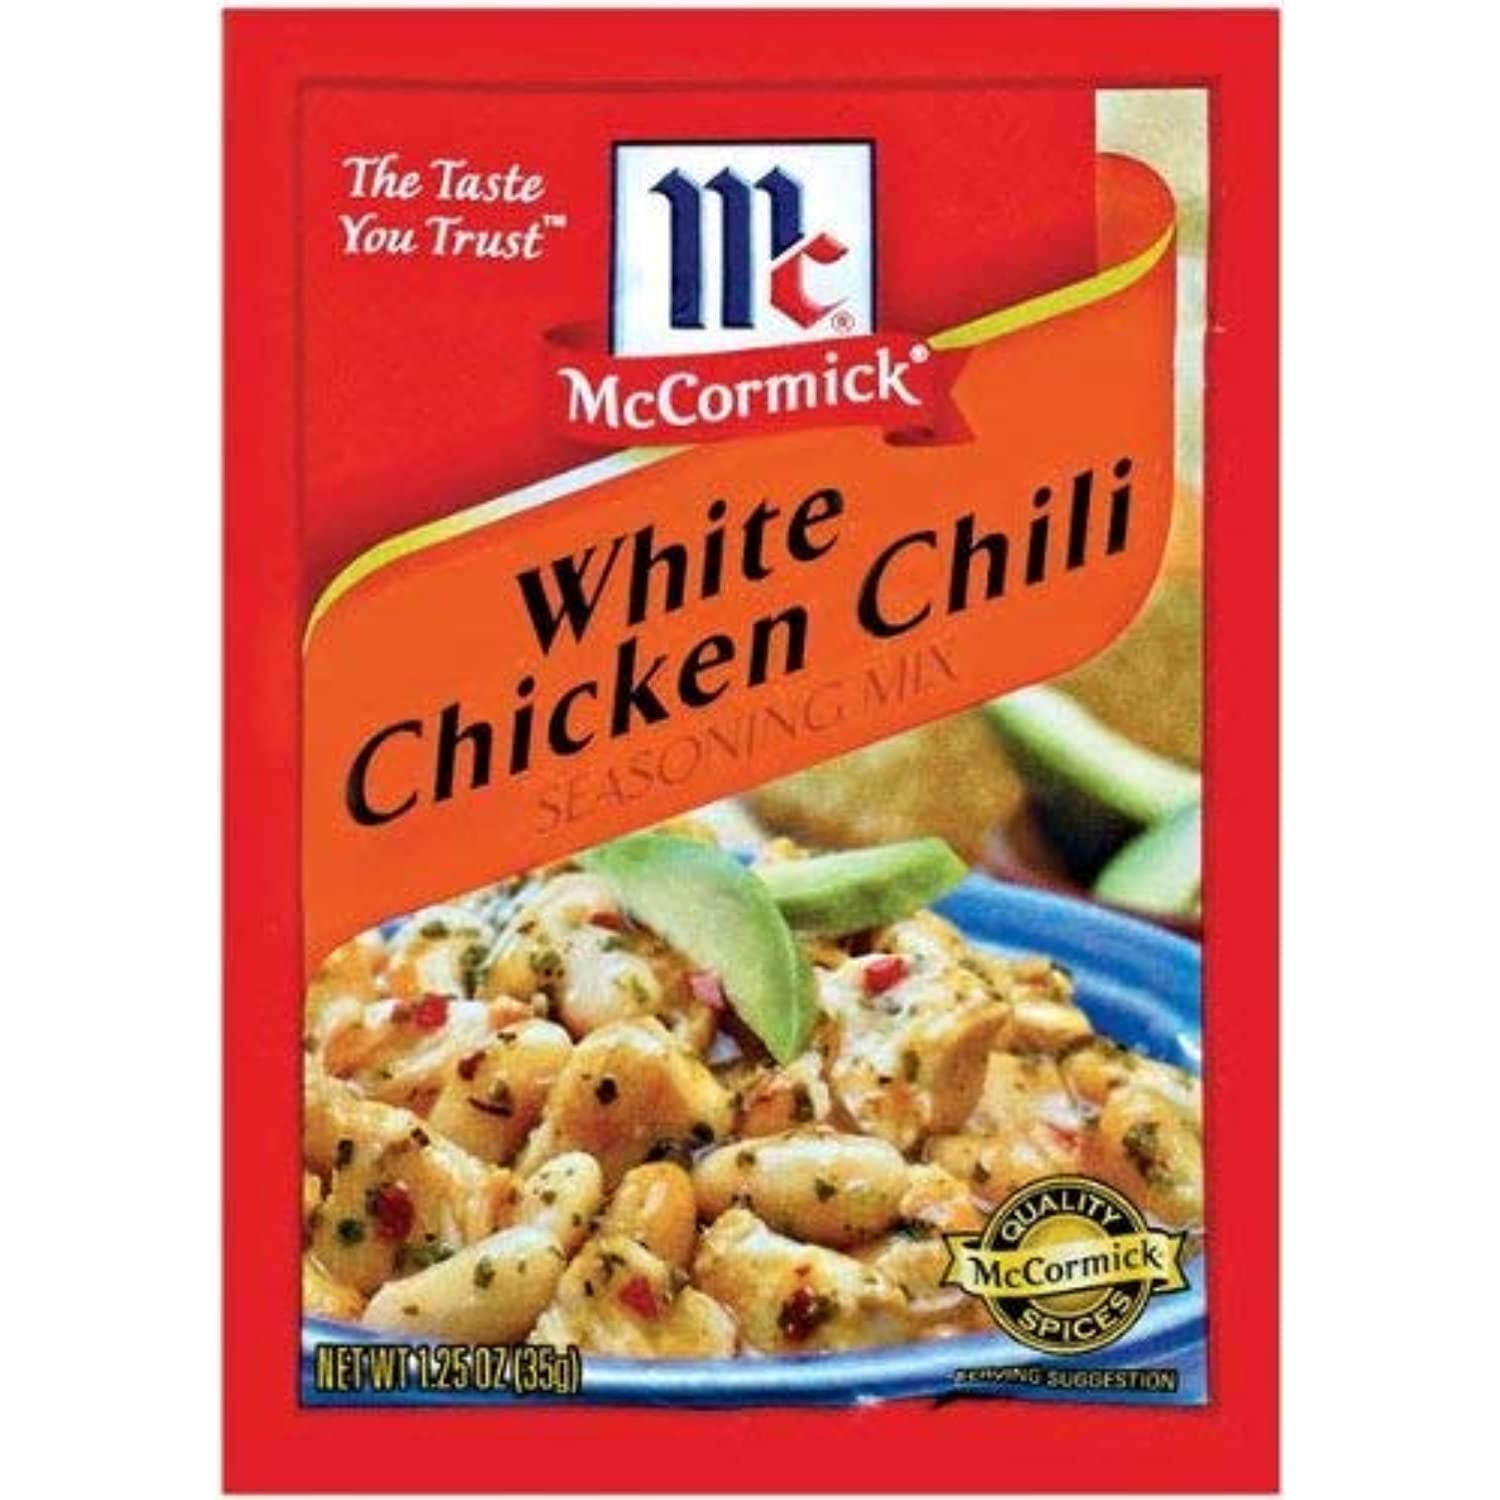 White Chicken Chili Seasoning Packet & Recipe Card – C3 Bros Spices